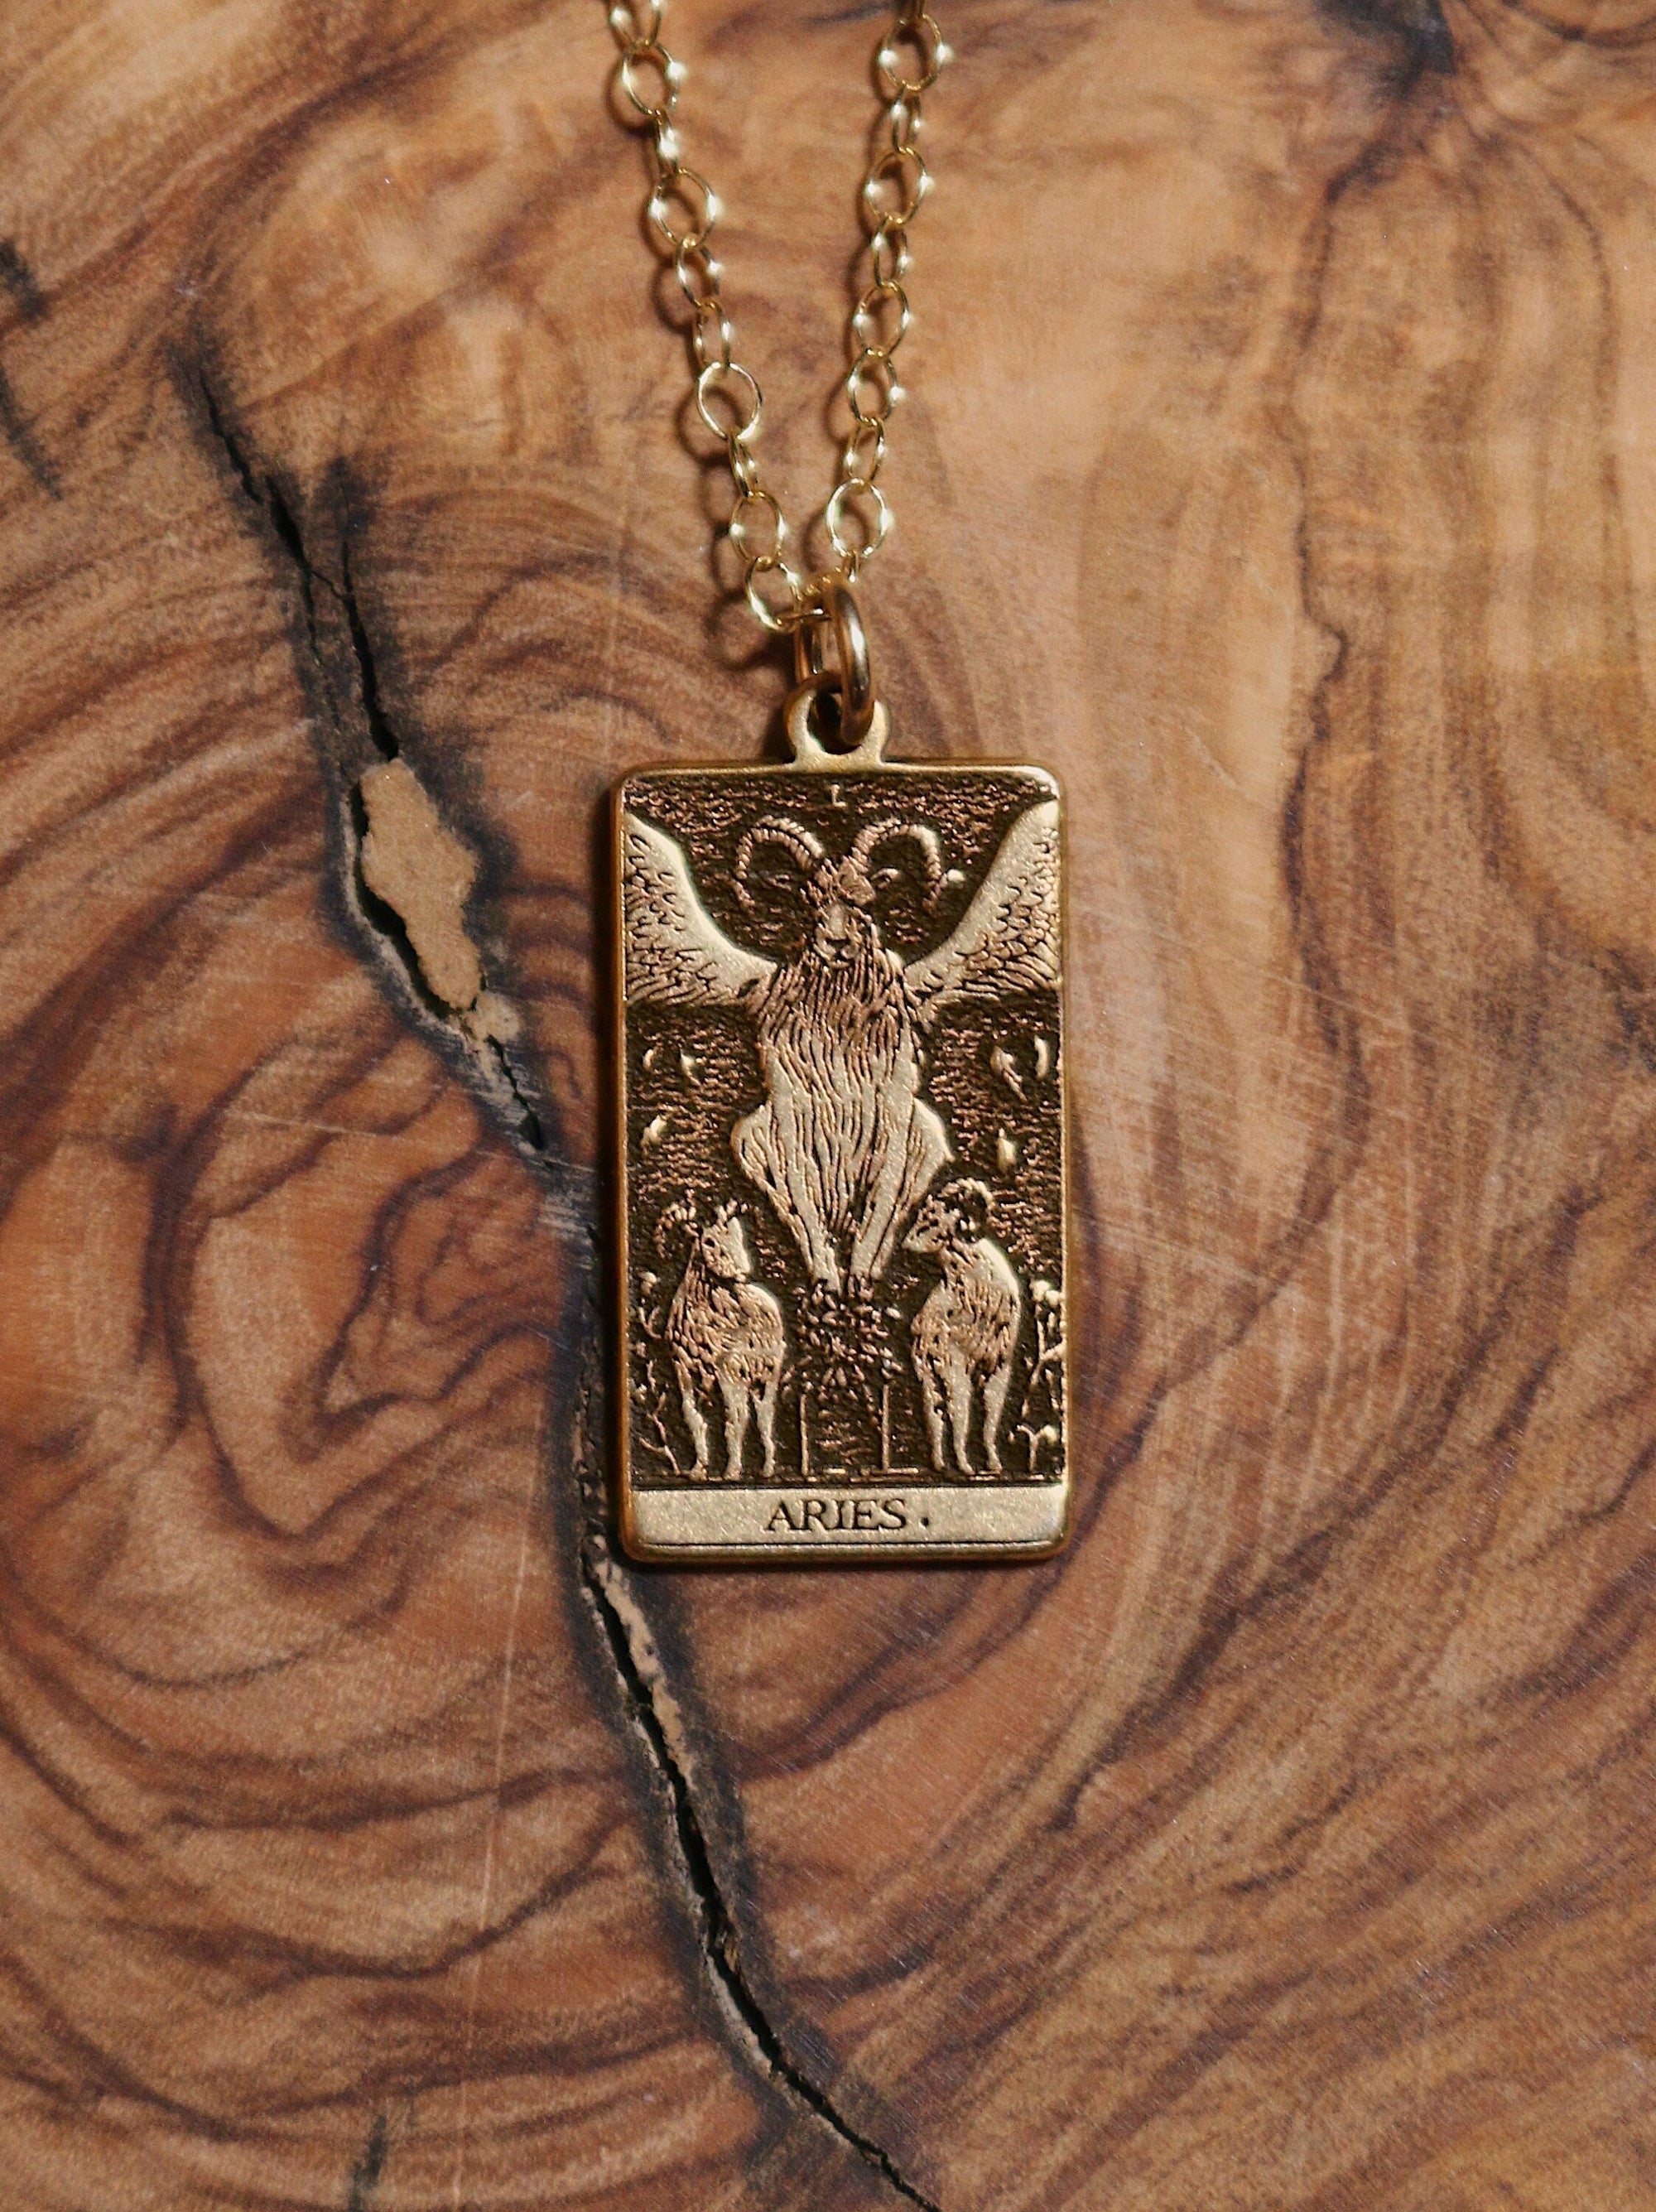 Aries The Devil Tarot Card Inspired Zodiac Necklace - Gold Filled